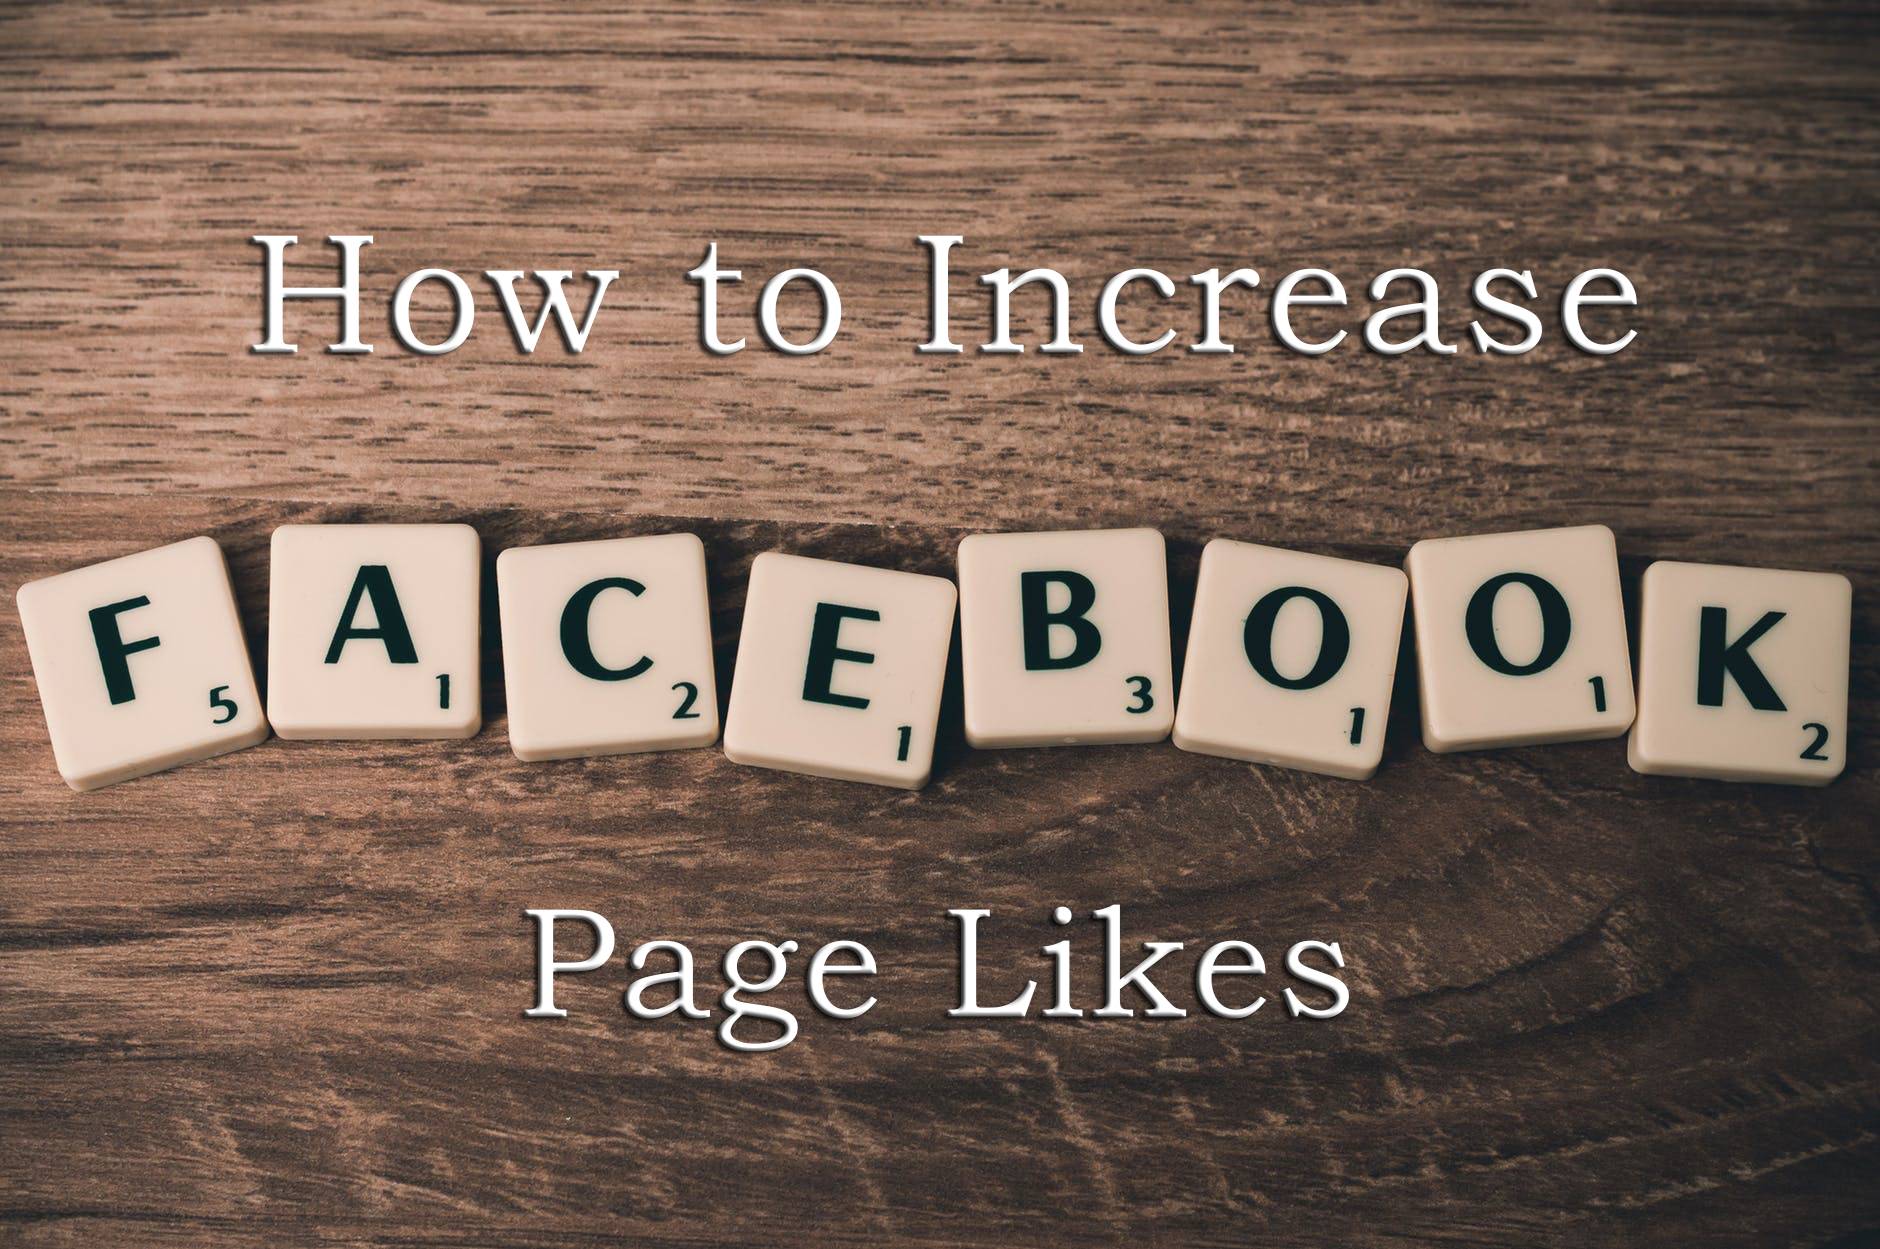 Finest Methods to increase likes on your Facebook page